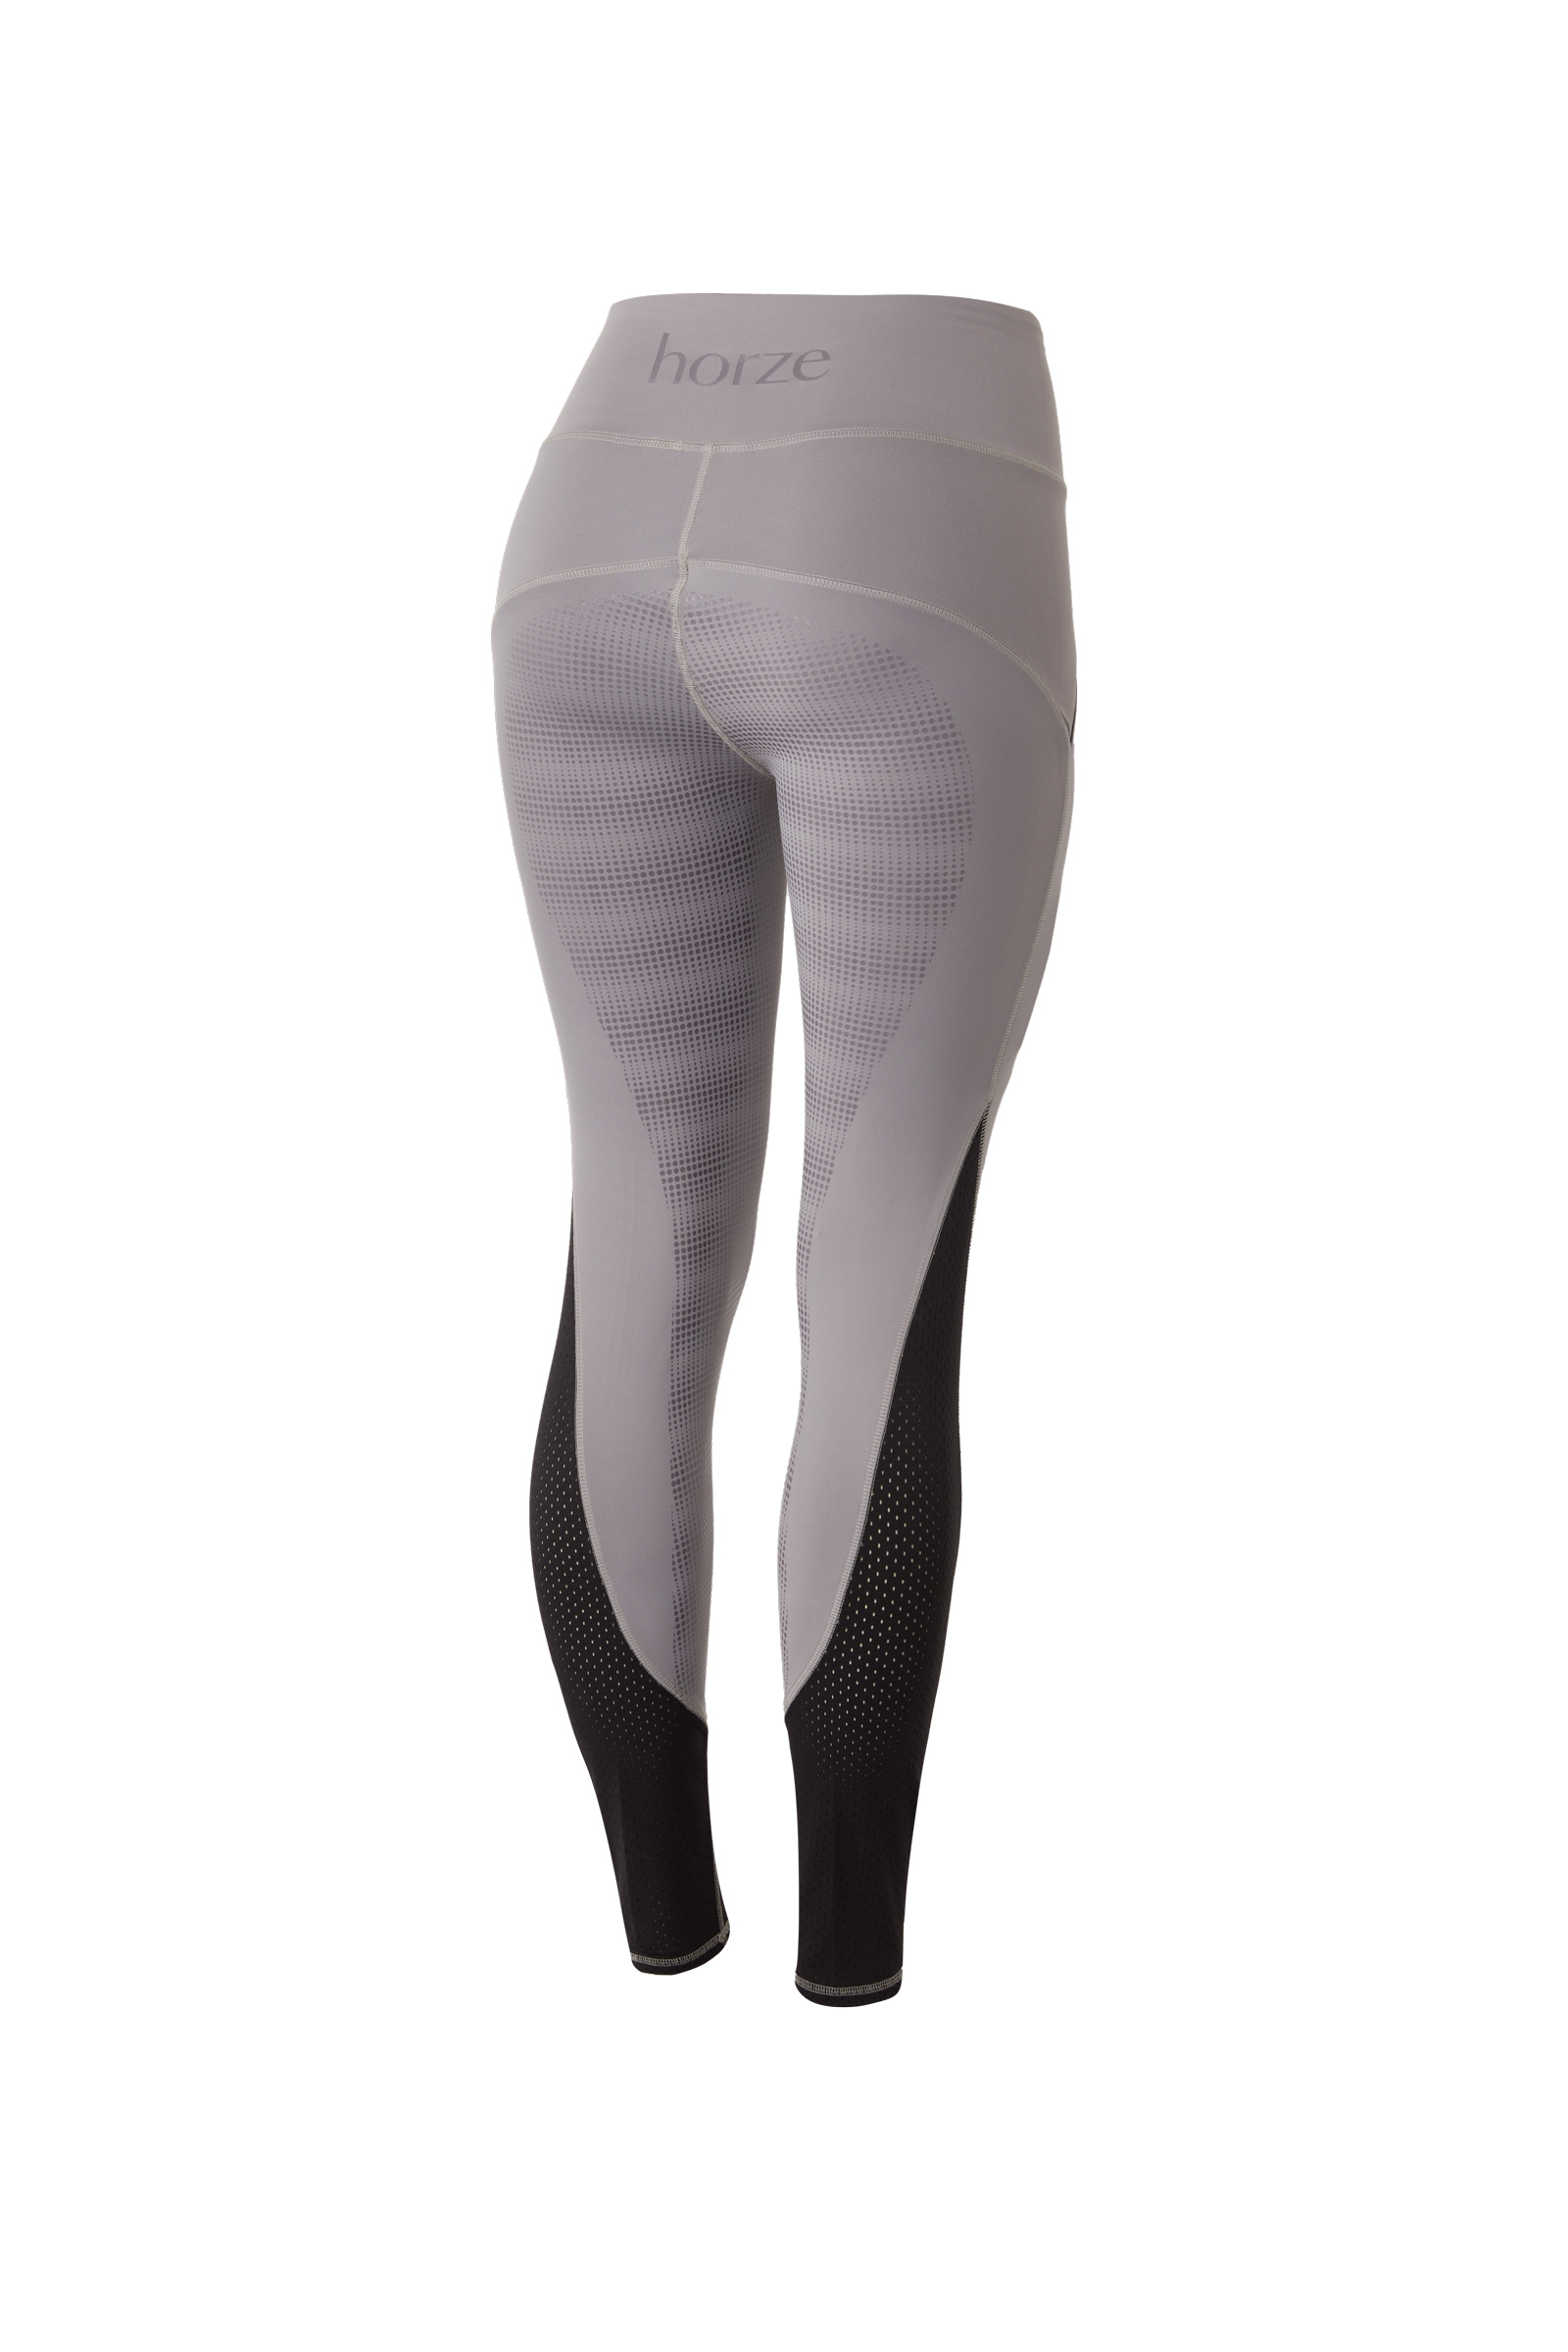 Buy Horze Women's High Waist Silicone Full Seat Riding Tights with